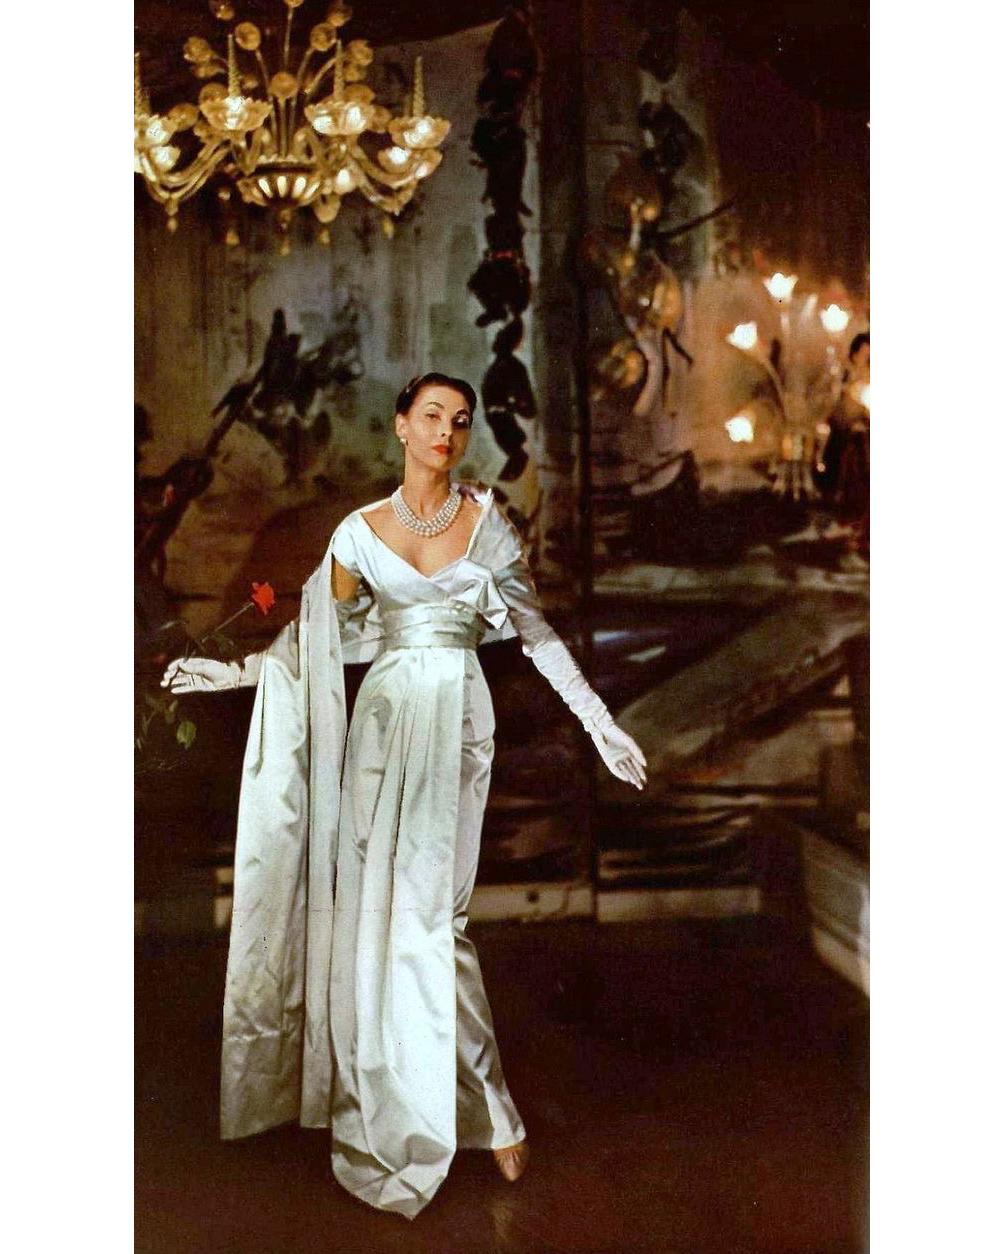 S/S 1955 Christian Dior (Attributed) short sleeve ecru satin gown with sash. Short sleeve gown with pleated bust and raised pleated detail to side, with sash that drapes over shoulder, and additional sash detail draping from waist to hem. Back zip